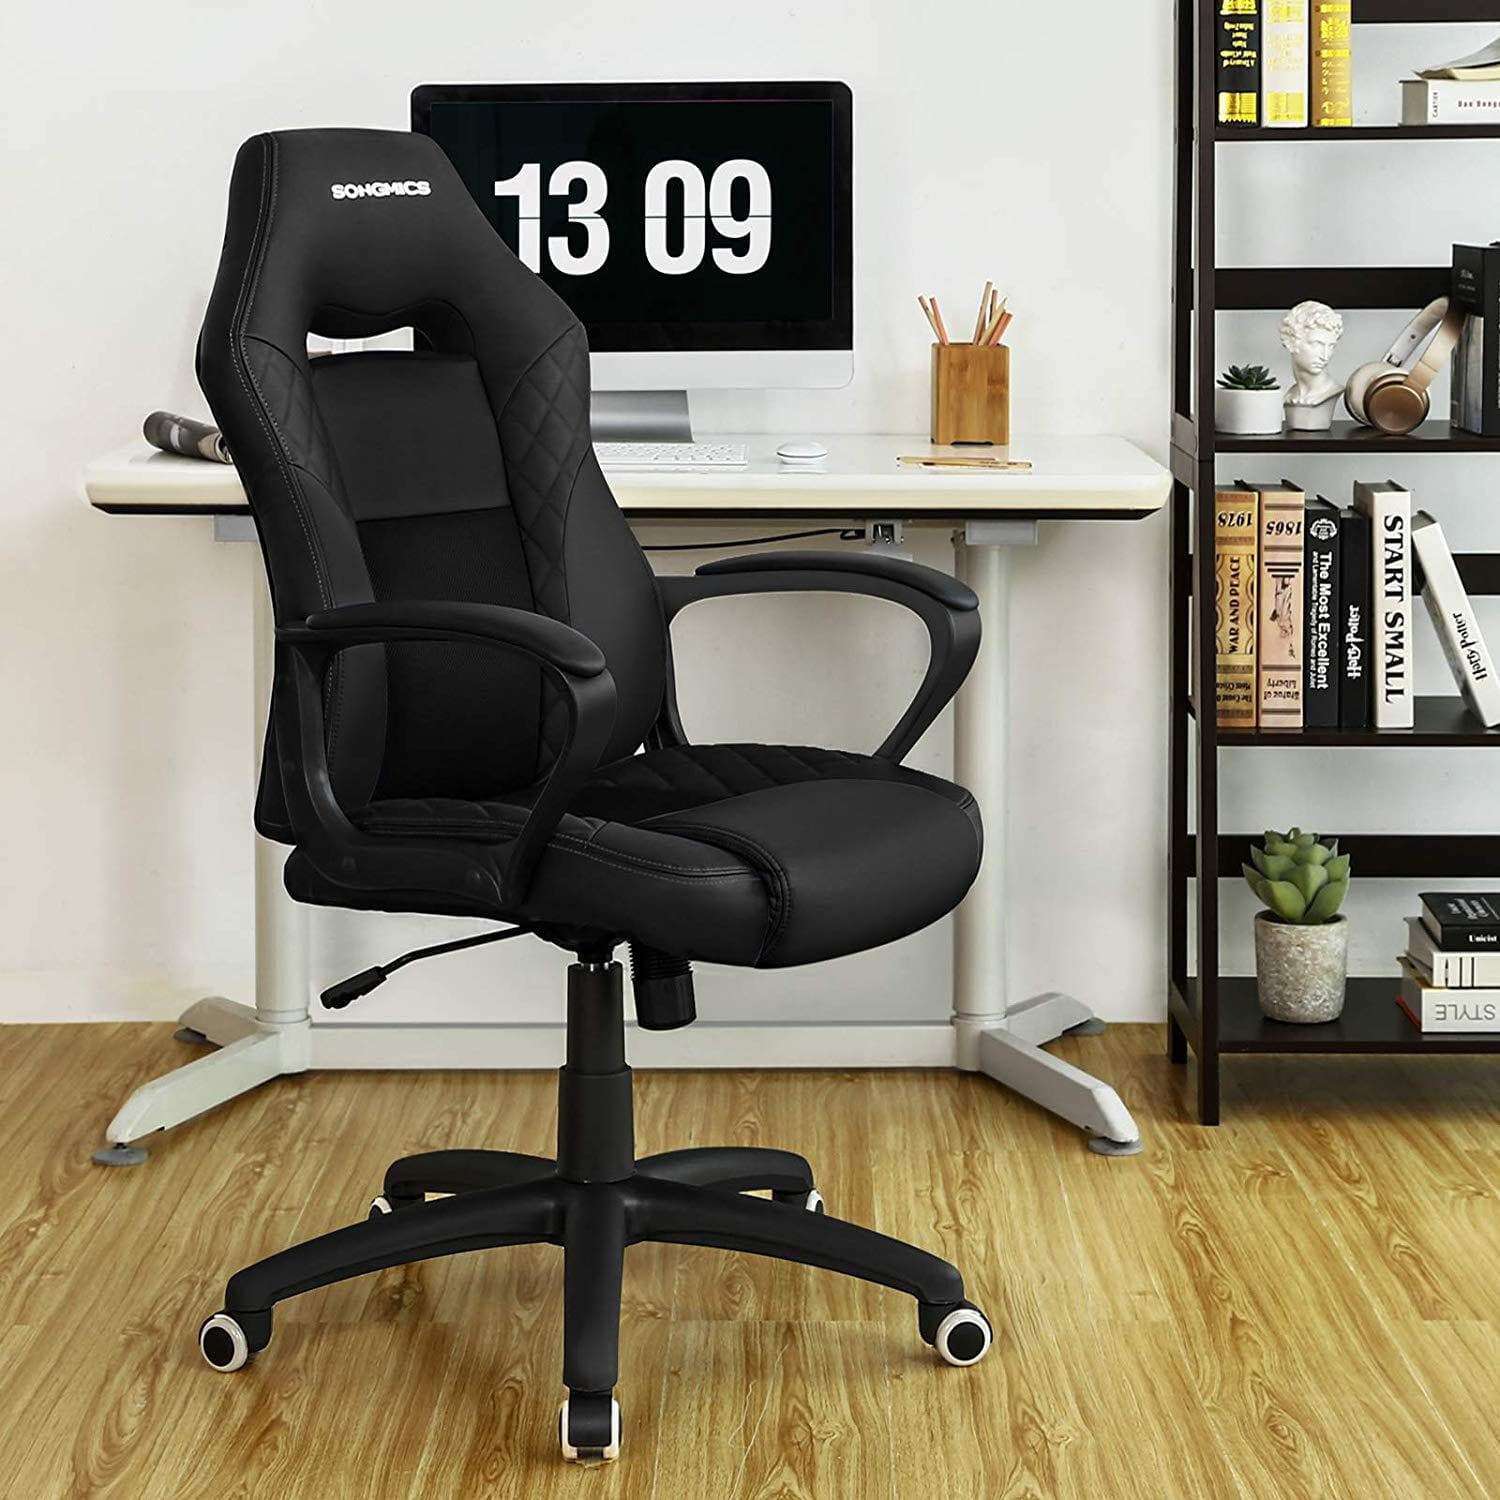 Nancy's Bellerose Office Chair - Height Adjustable - Gaming Chair - Office Chairs - Black - 70 x 64 x 106